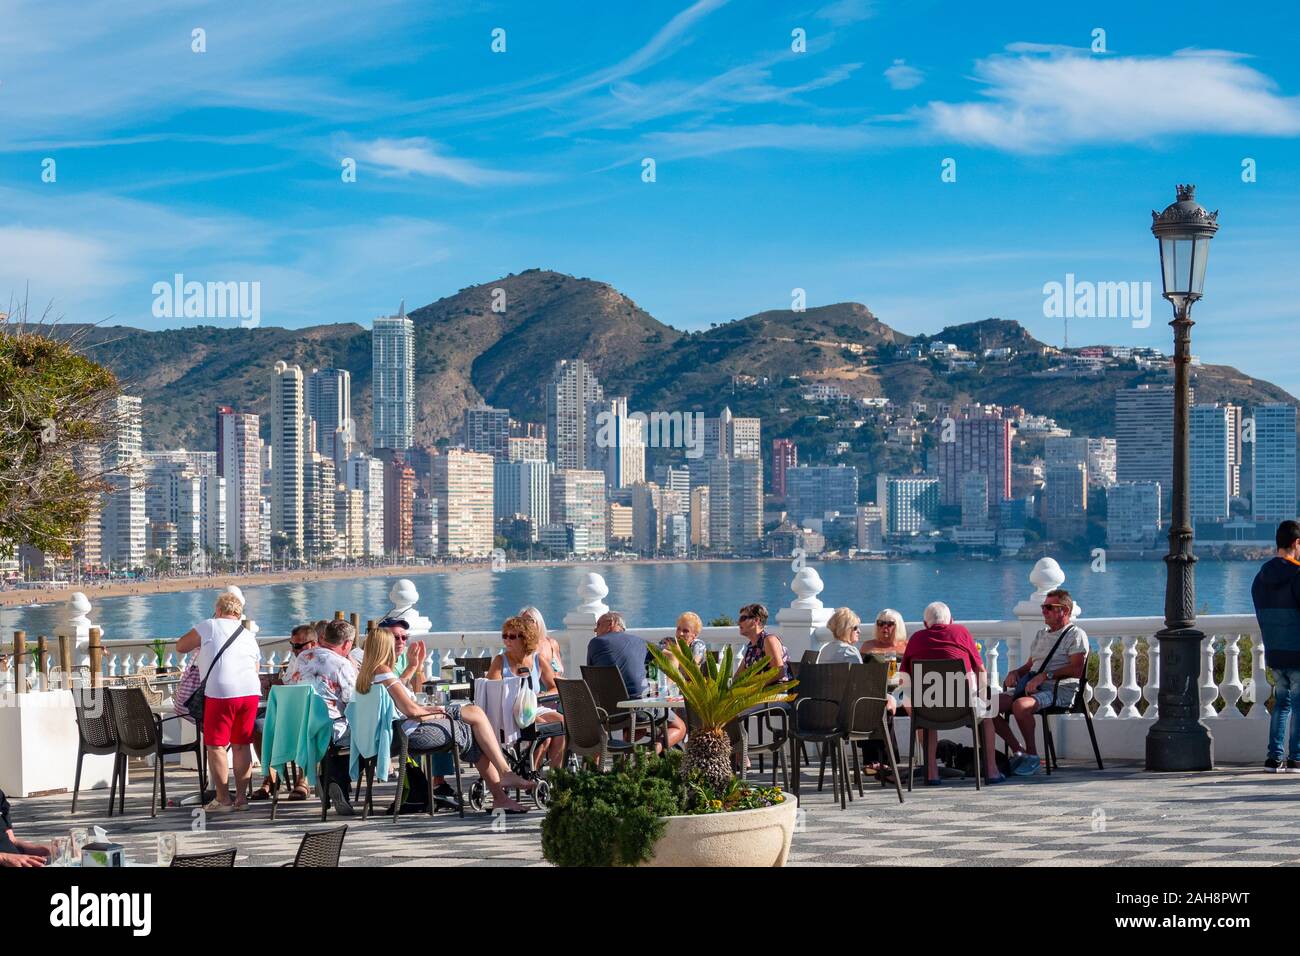 Benidorm, Costa Blanca, Spain,  tourists on the Balcon enjoying the winter sun with a view of Levante Beach in the background. Stock Photo